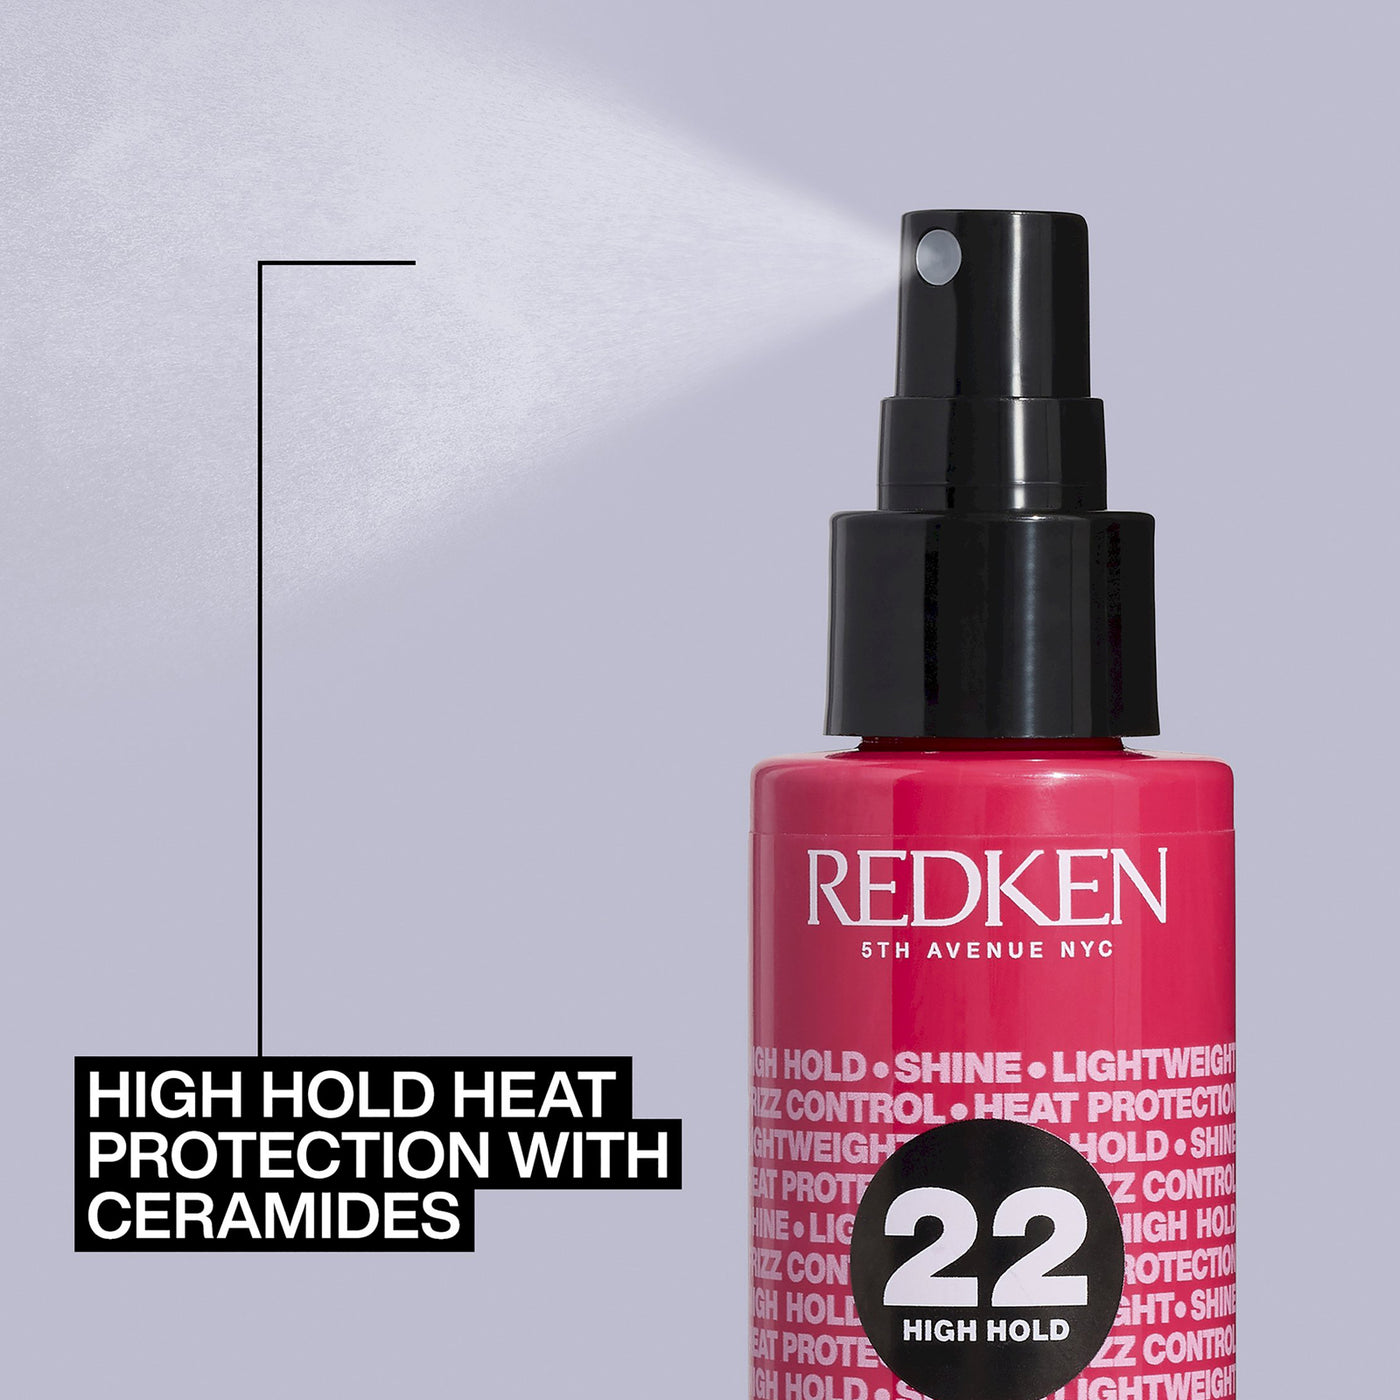 Redken Thermal Spray High Hold (125ml) feature